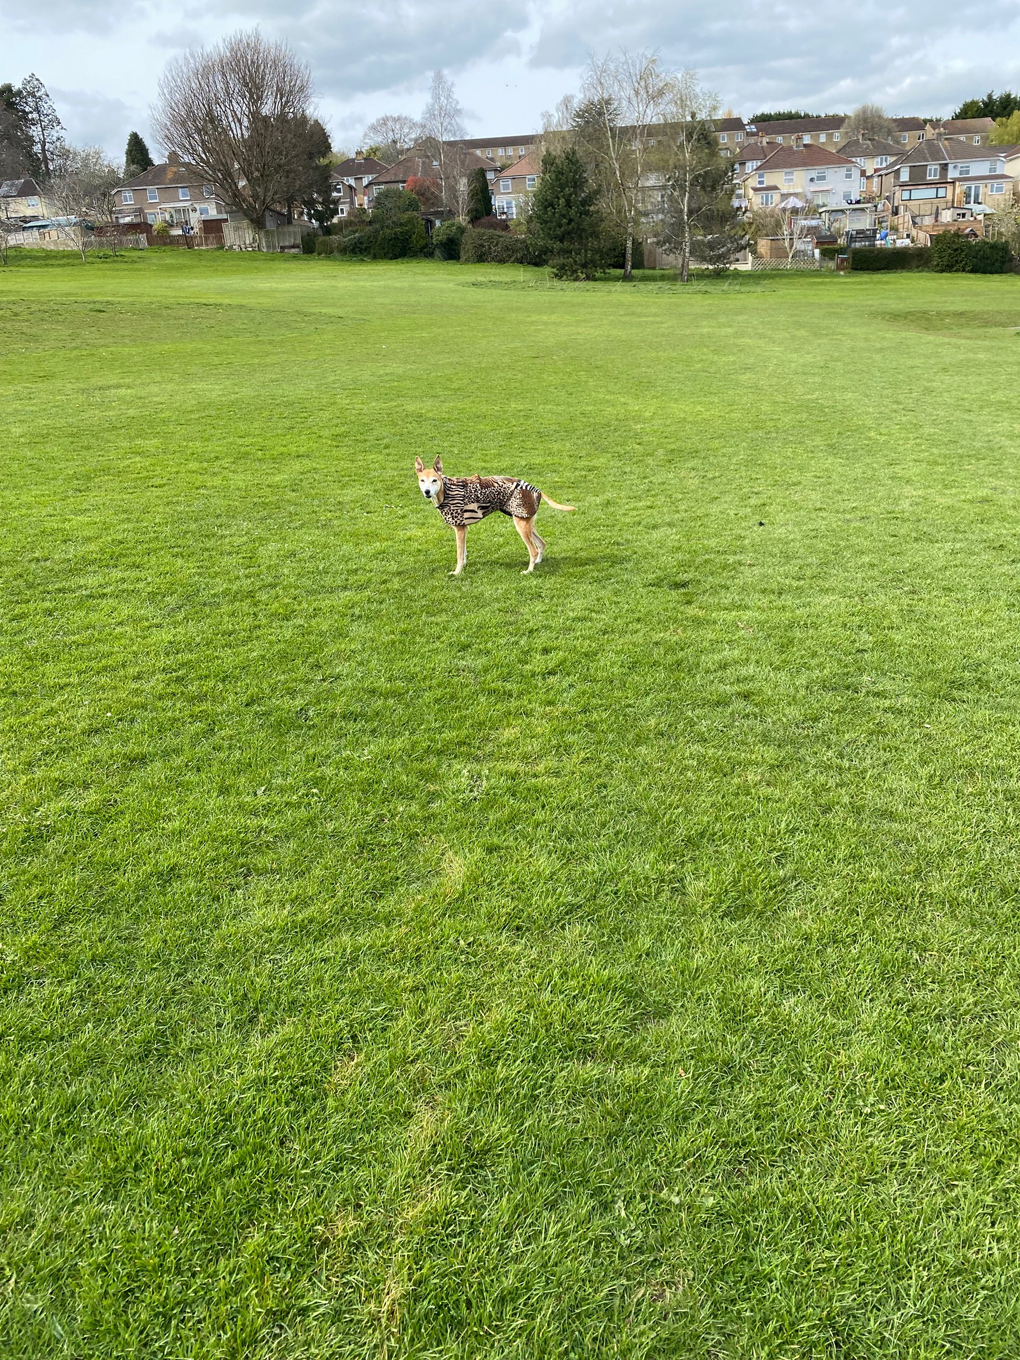 A dog in a patterned coat standing in the middle of a green, grassy field